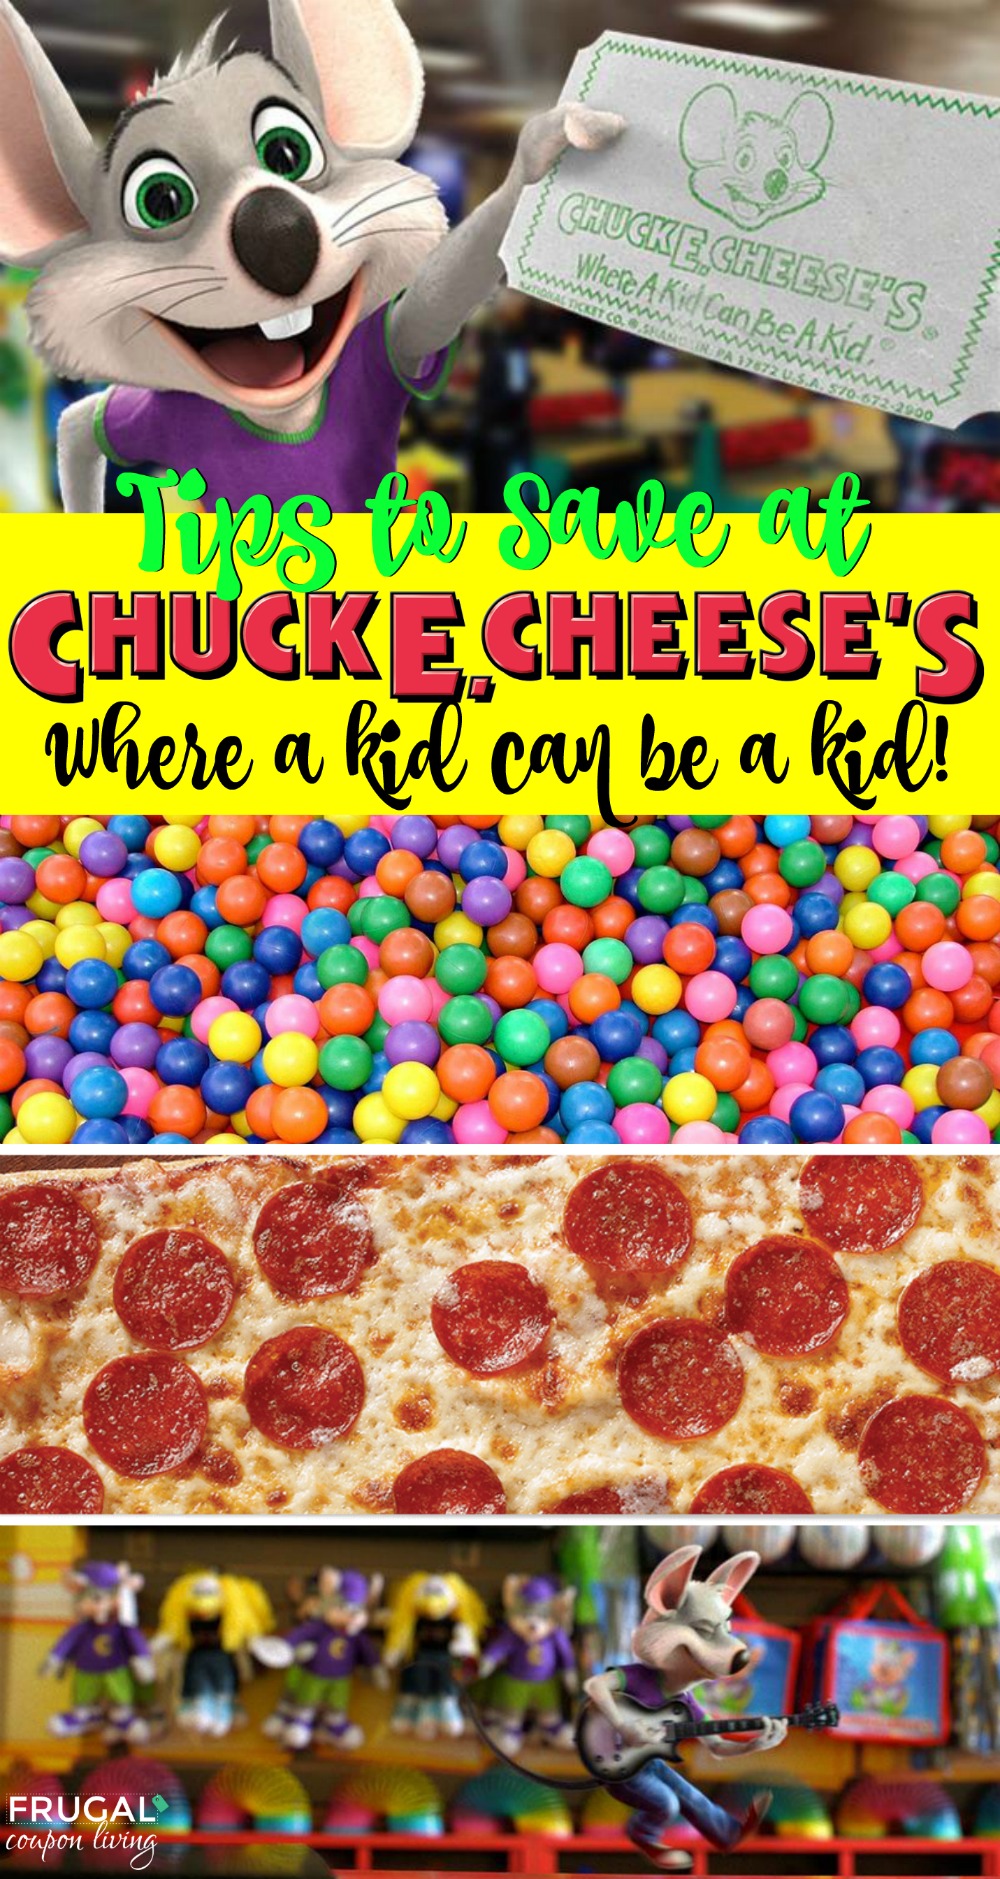 Save-at-Chuck-E-Cheese-Collage-frugal-coupon-living